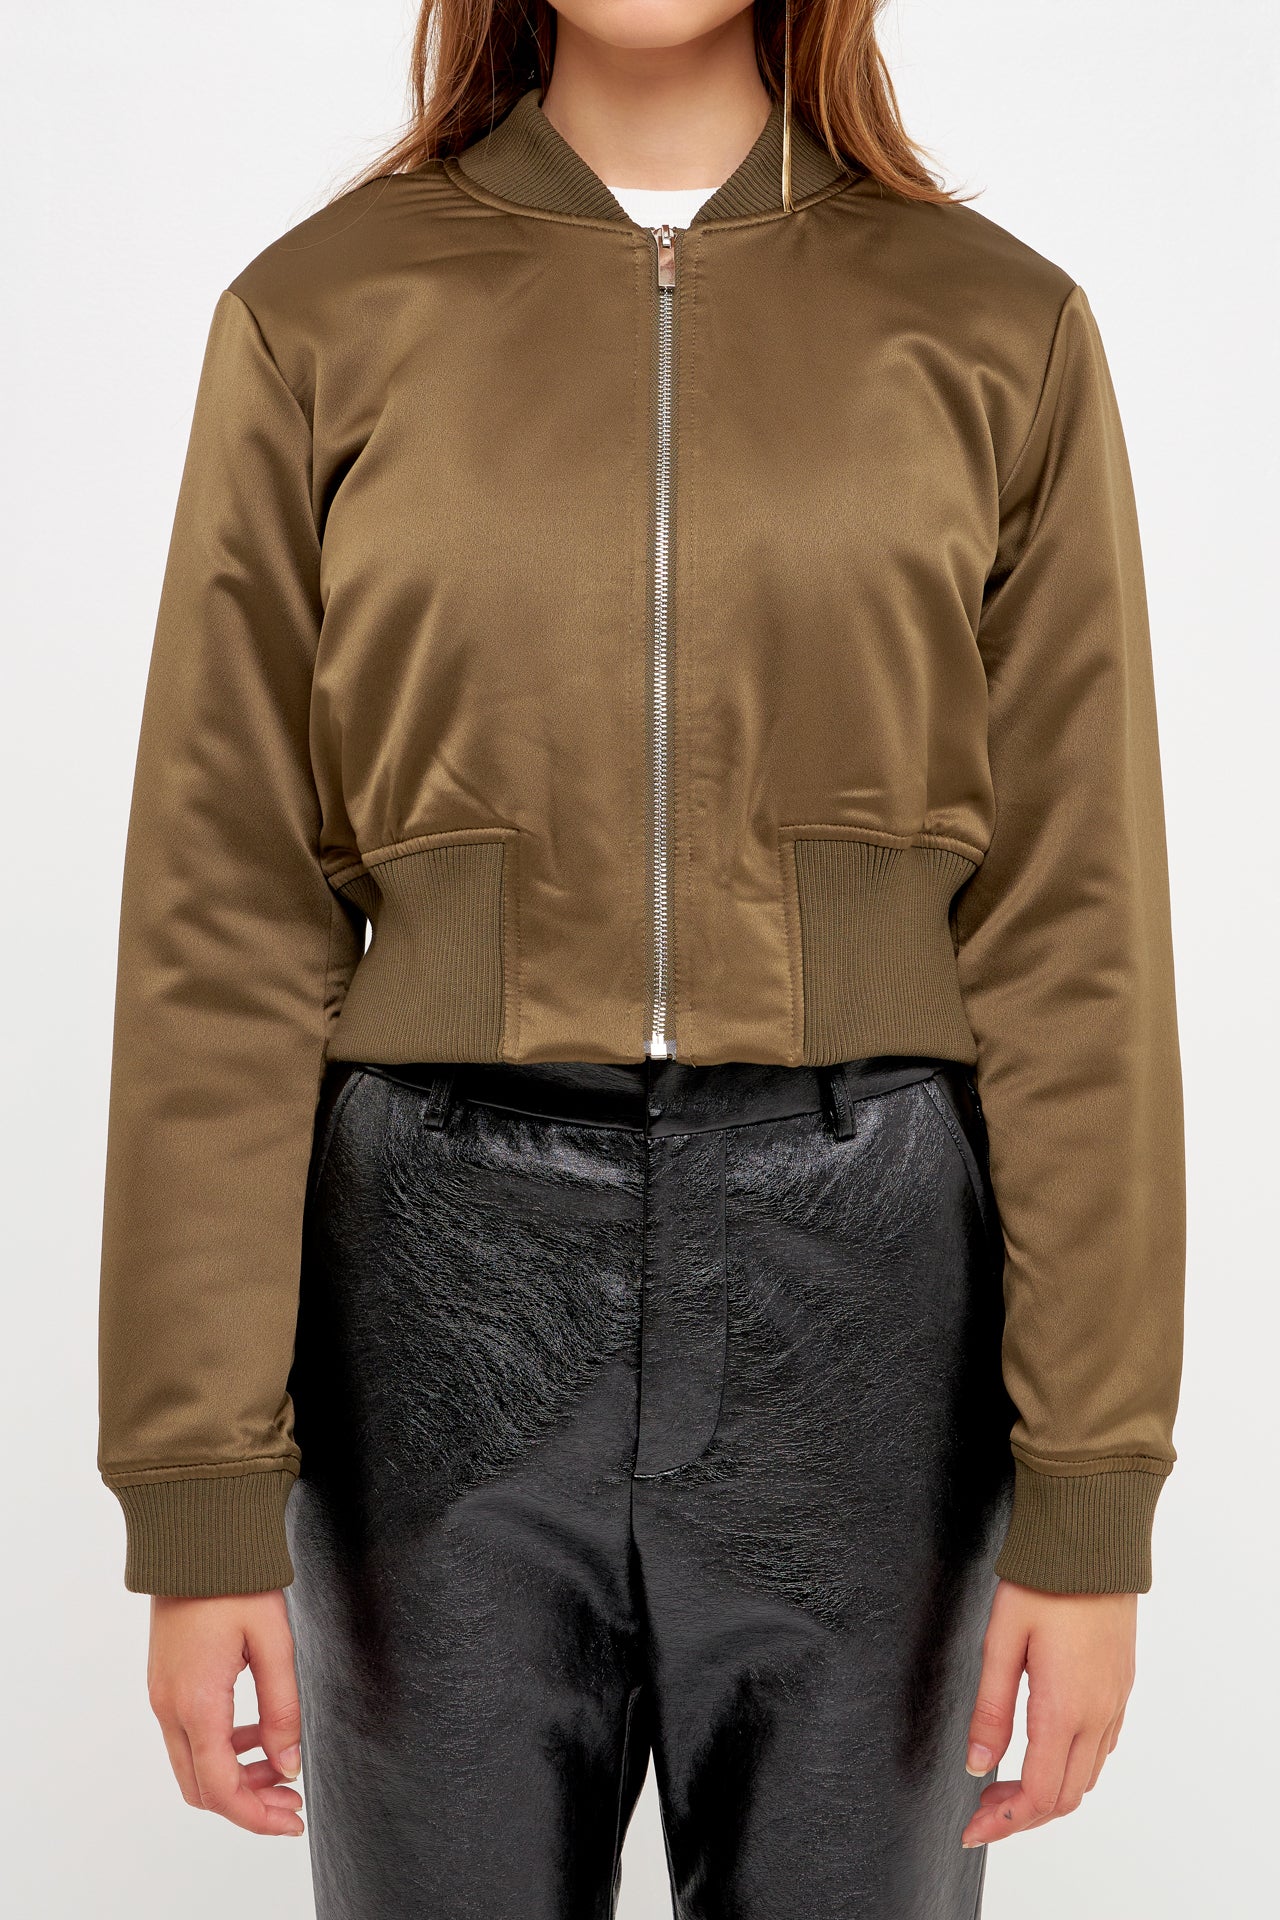 GREY LAB-Cropped Satin Effect Bomber Jacket-JACKETS available at Objectrare